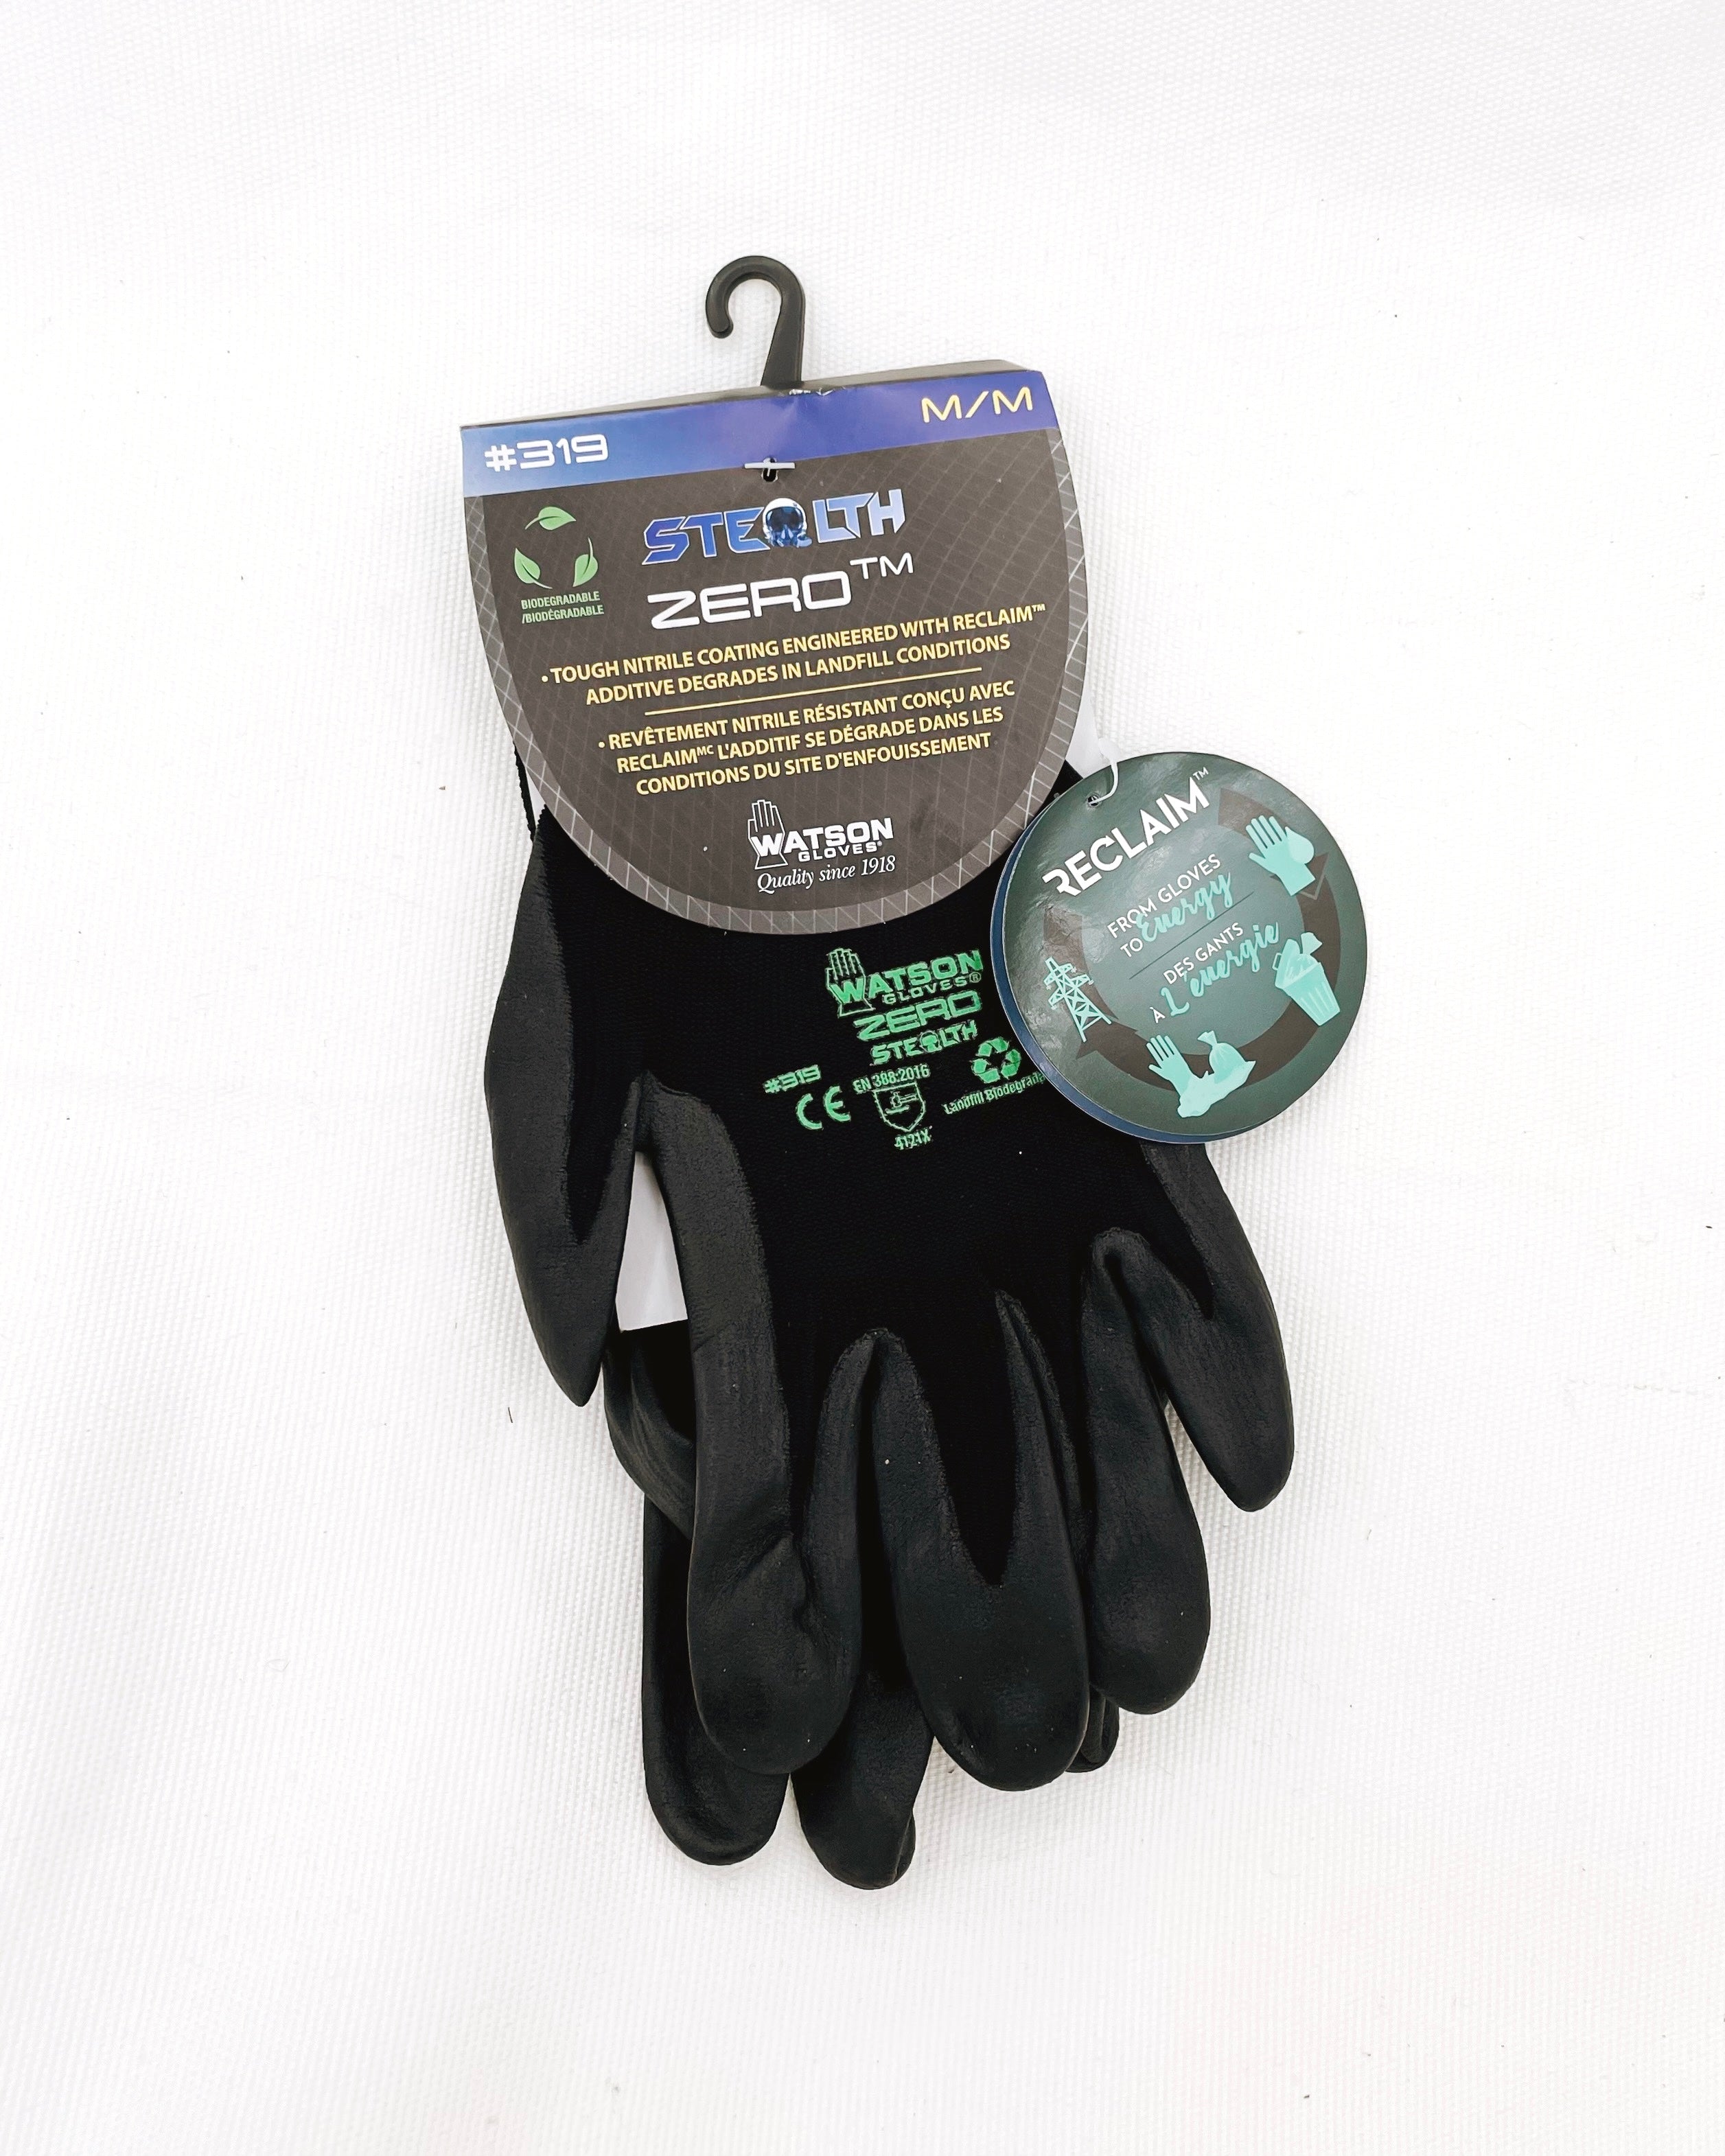 Flat lay image of Biodegradable Men’s Garden Gloves Stealth Zero by Watson Gloves on white background. There is one pair of black gloves in this image. One is turned face up and one is turned face down. The gloves are black with a padded area for the palm. The Watson Gloves logo is in green font on the backside of the glove along with descriptive text.